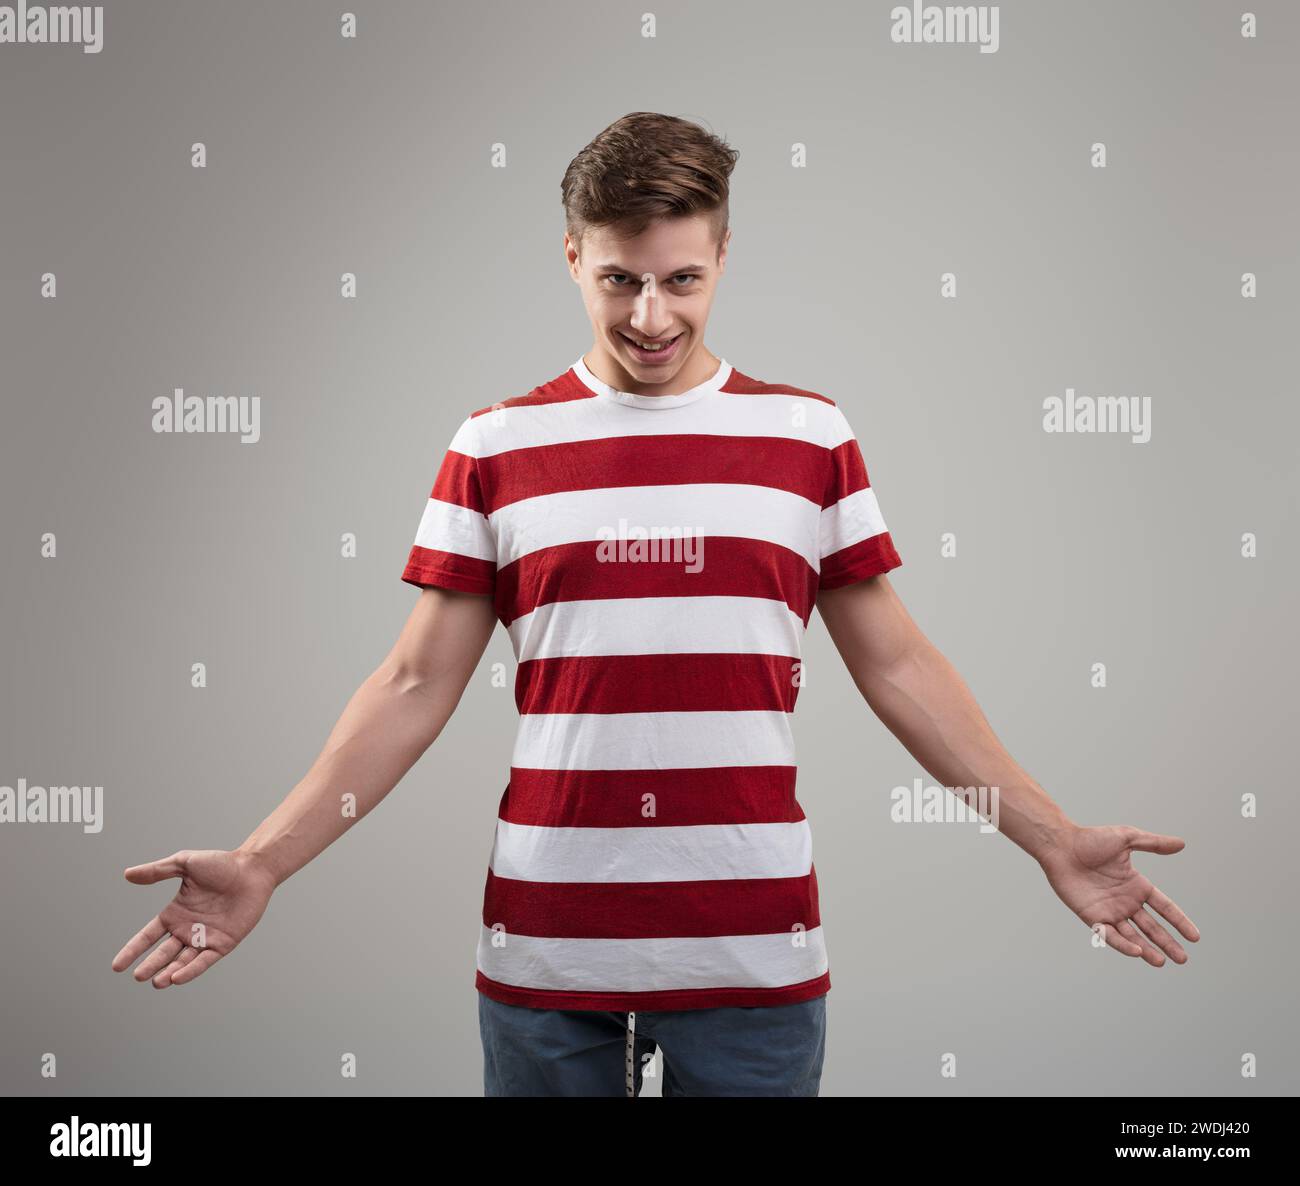 Casually dressed in stripes, his mischievous grin and shrug suggest a lighthearted, easygoing personality Stock Photo